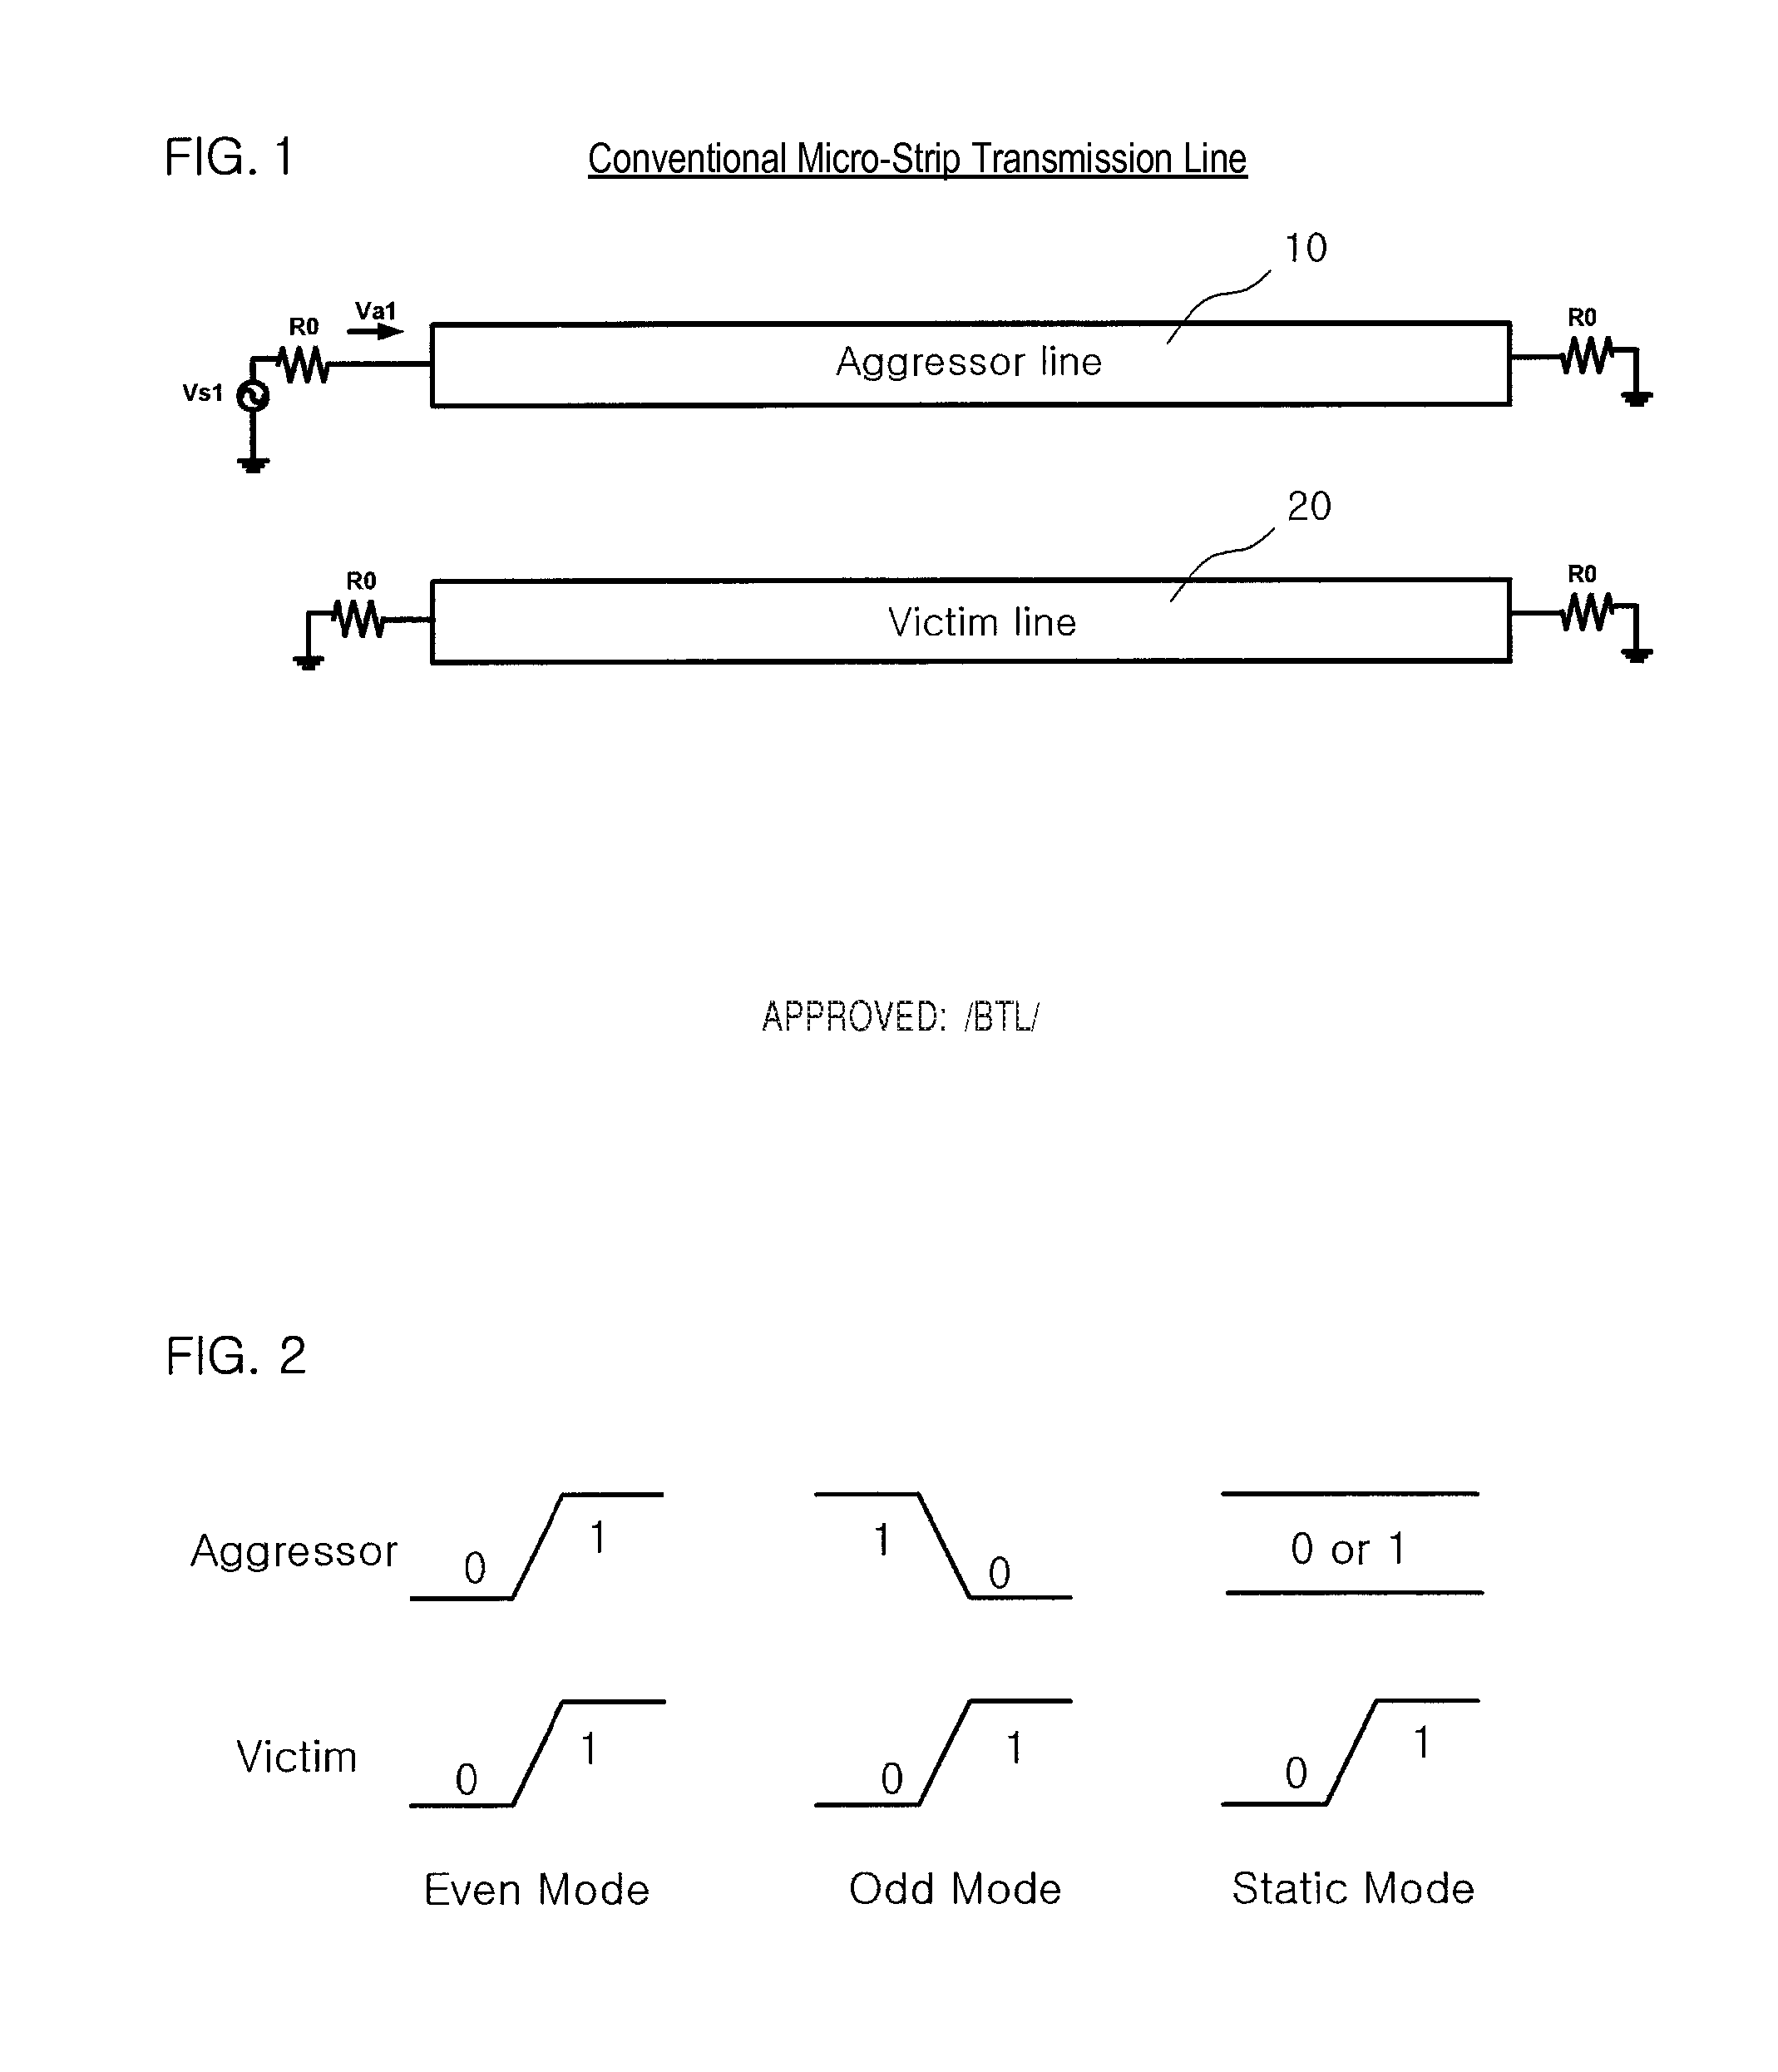 Serpentine micro-strip lines configured in an aggressor/victim type transmission line structure